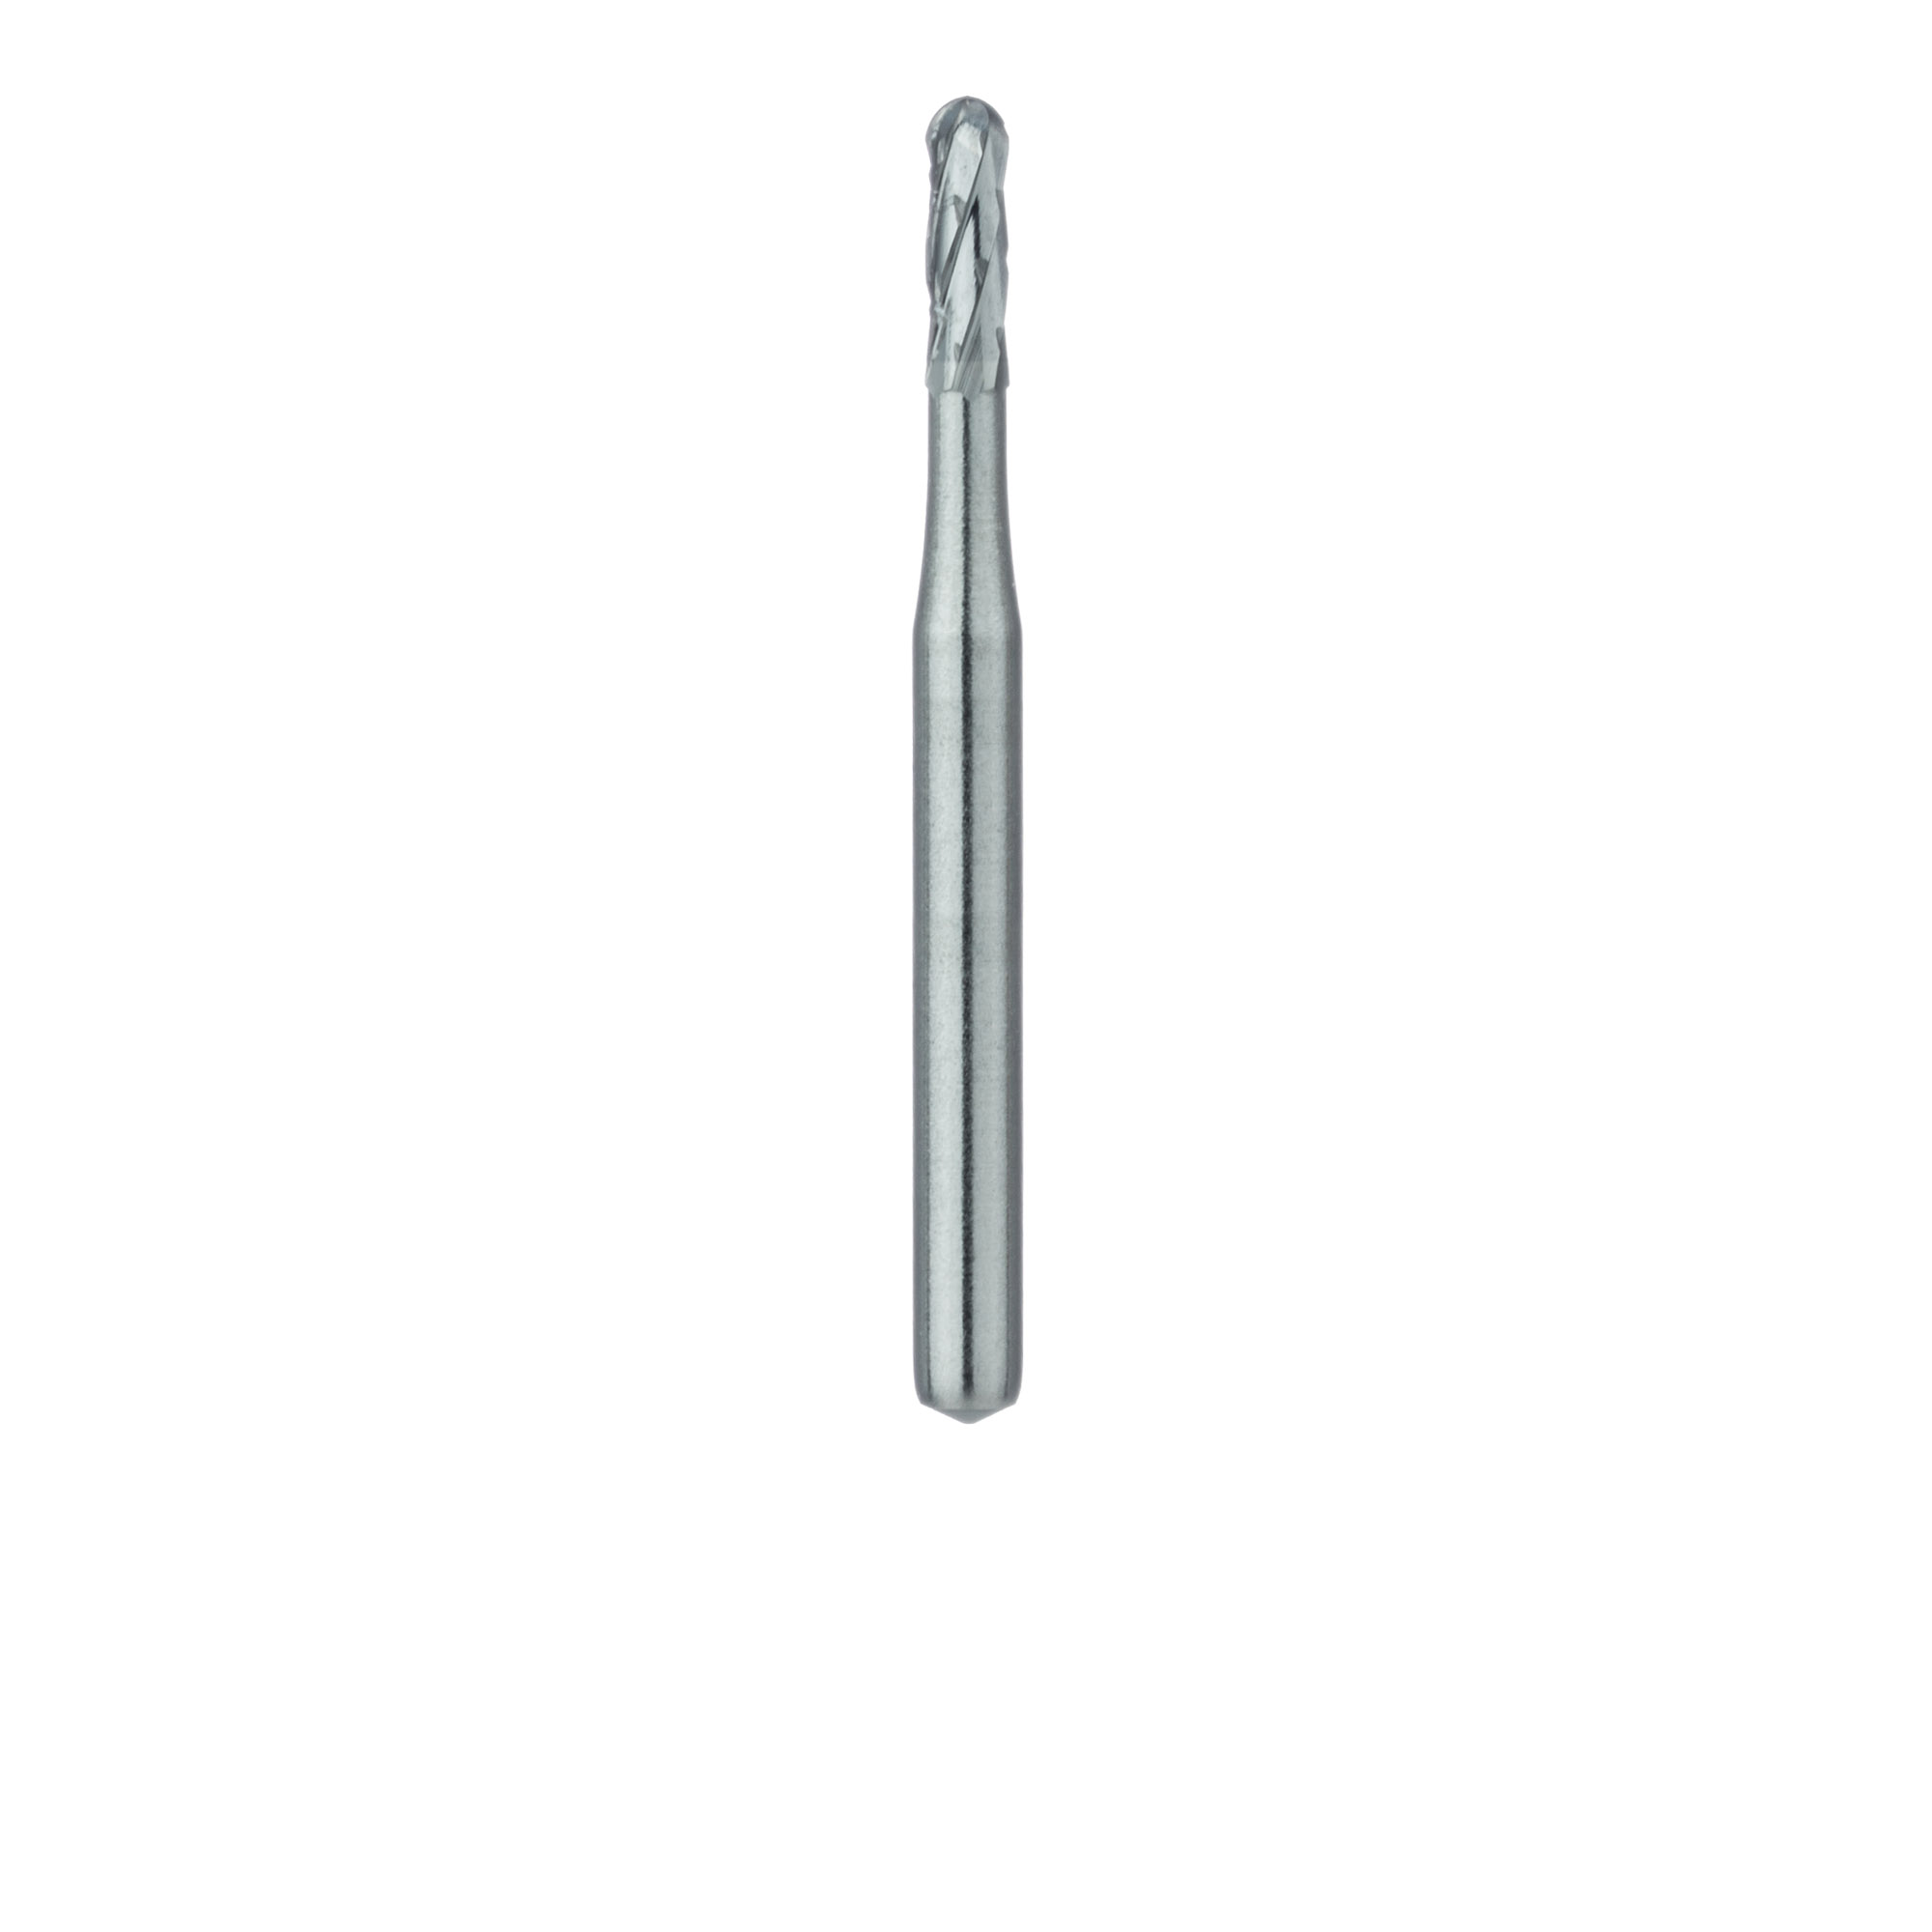 HM21RX-012-FG Carbide Bur Specialty, Crown Removal, Round End Cylinder 1.2mm FG